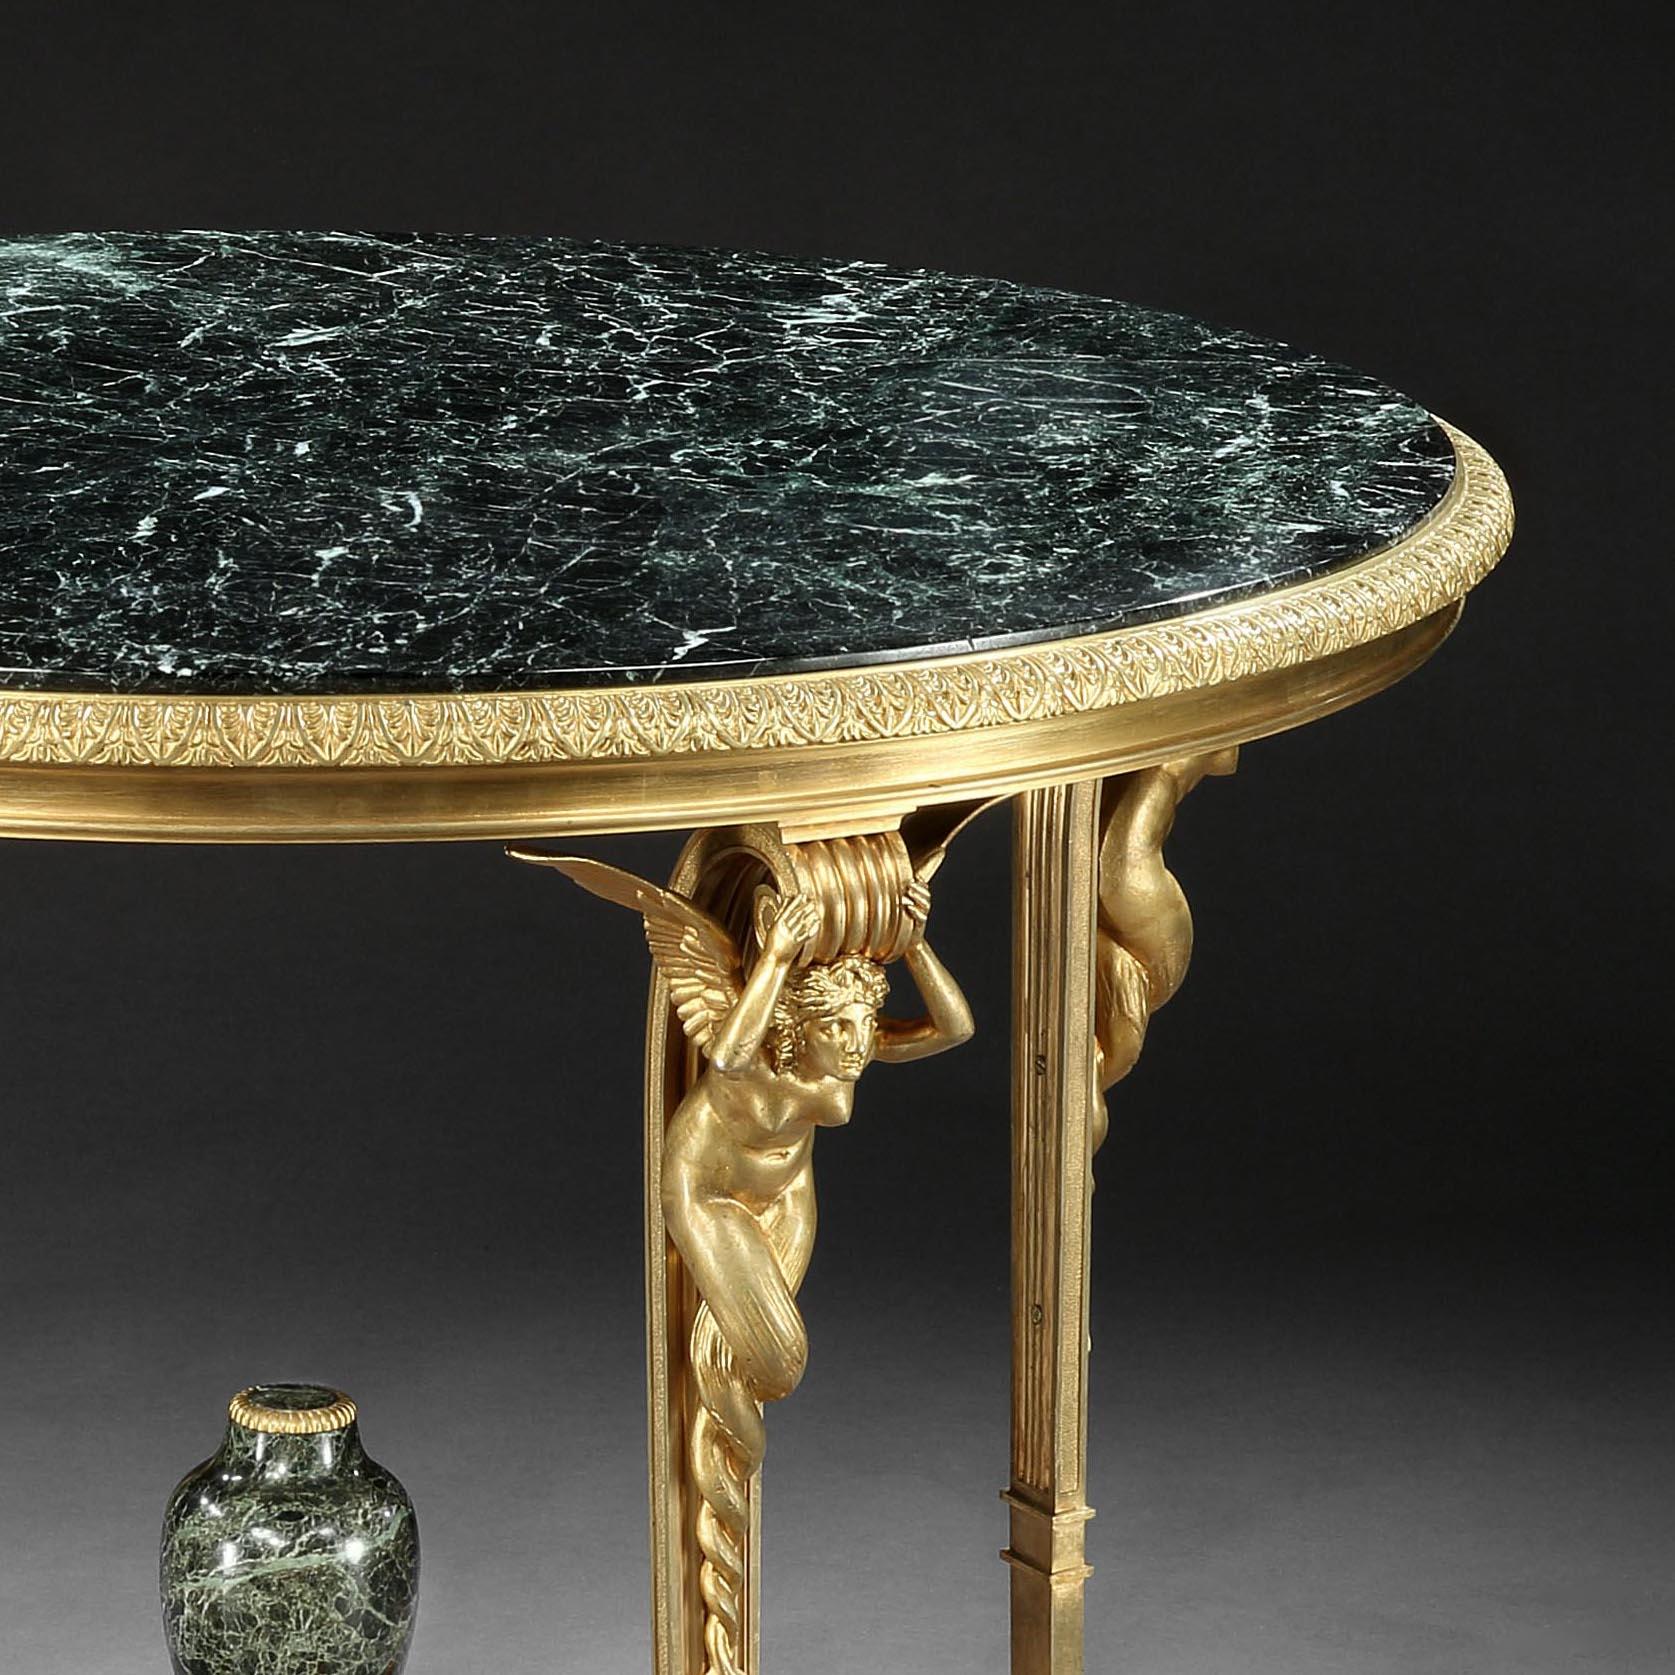 French 19th Century Empire Style Amboyna Gueridon Table attributed to Maison Millet